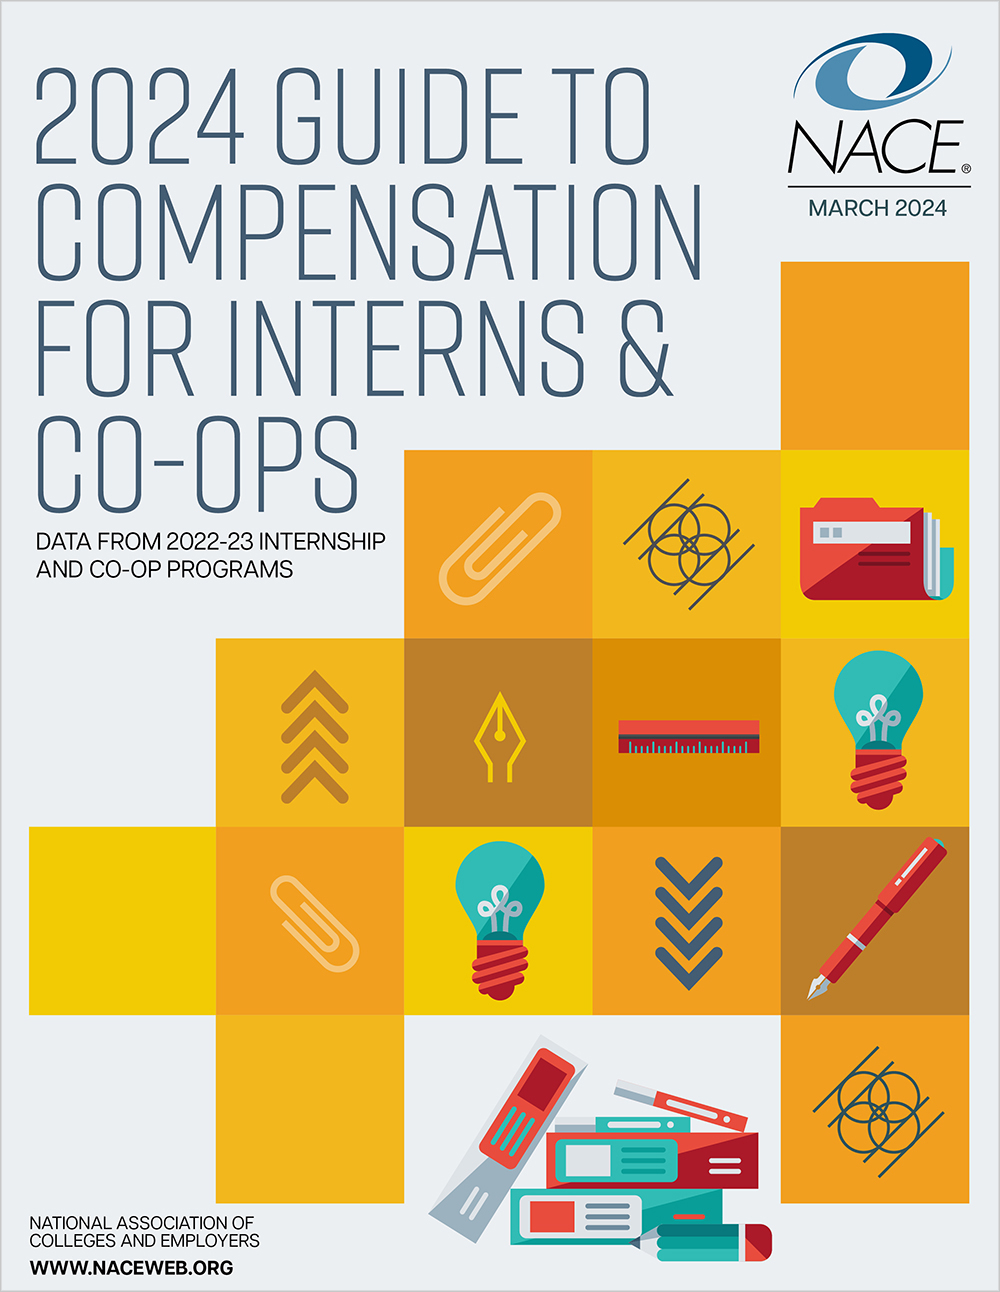 Guide to Compensation for Interns & Co-ops